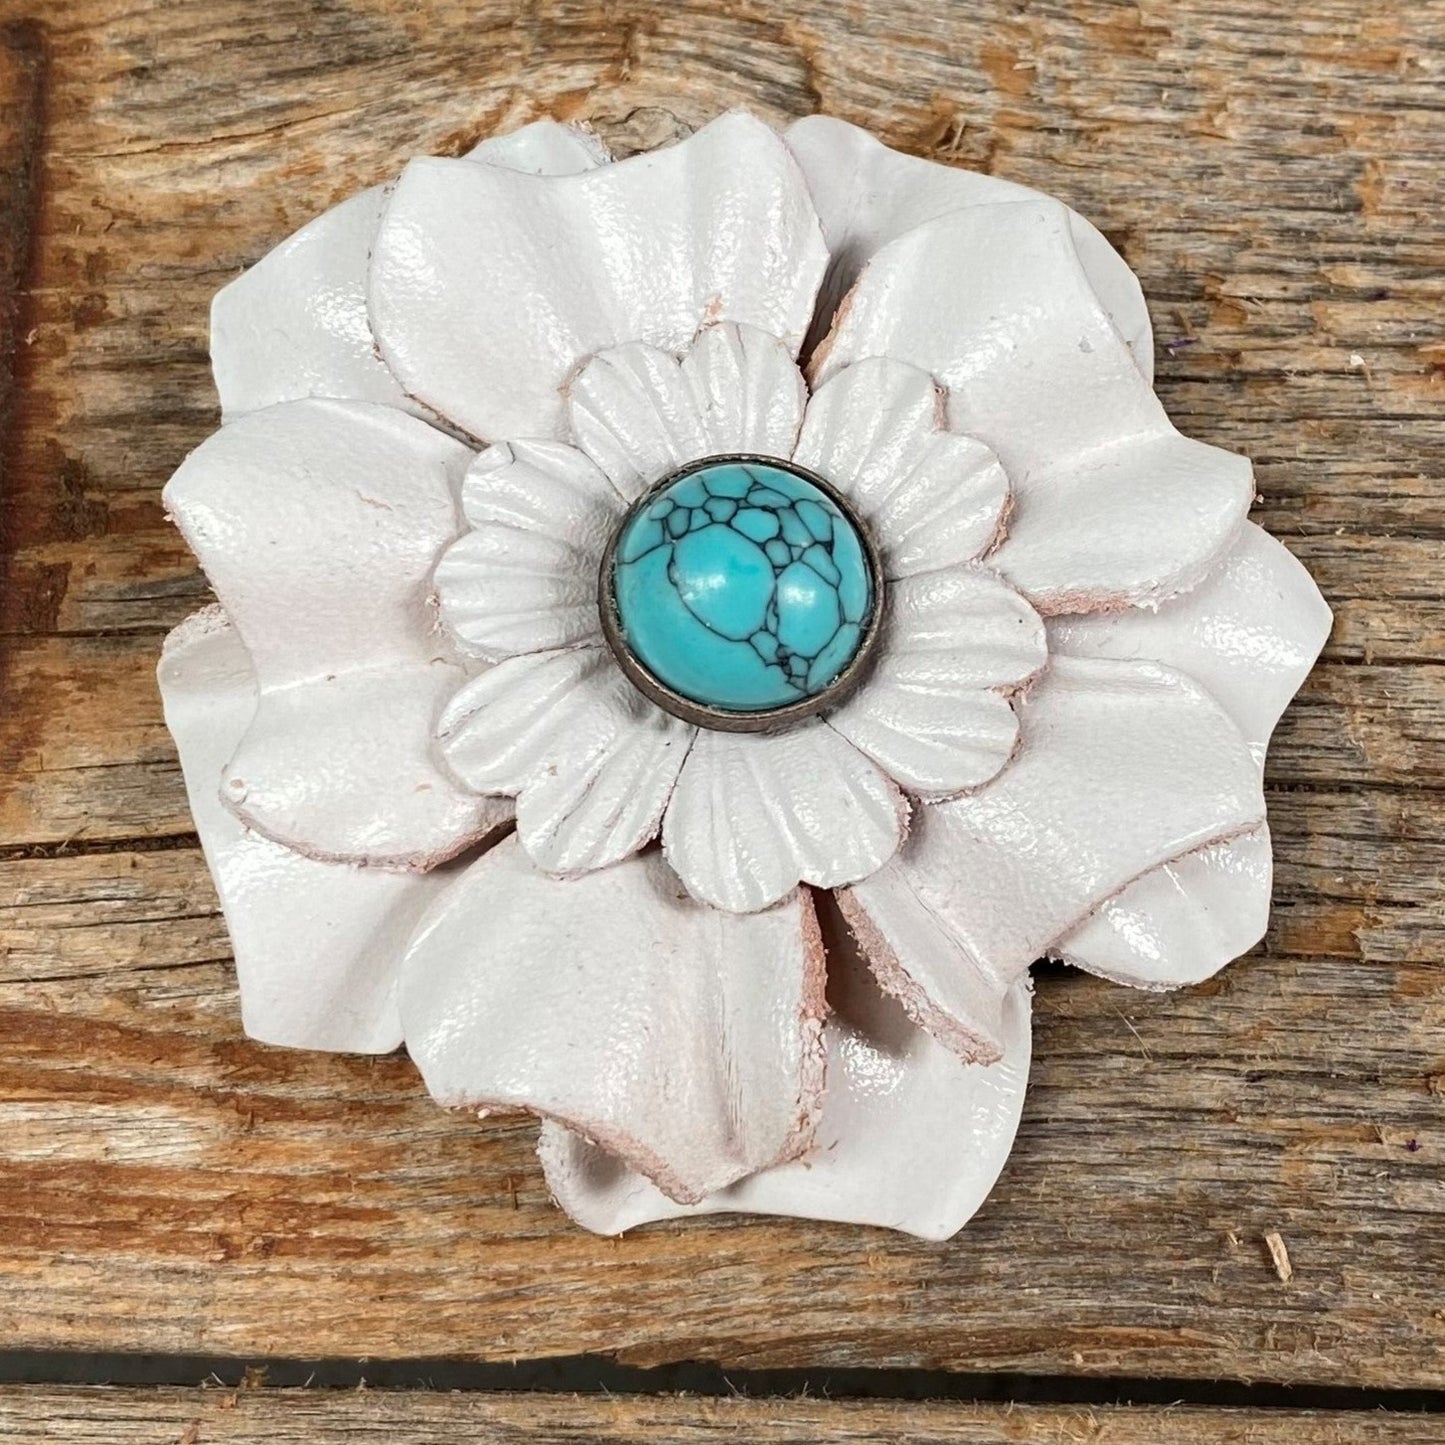 White Carnation Flower With Round Turquoise Cabochon